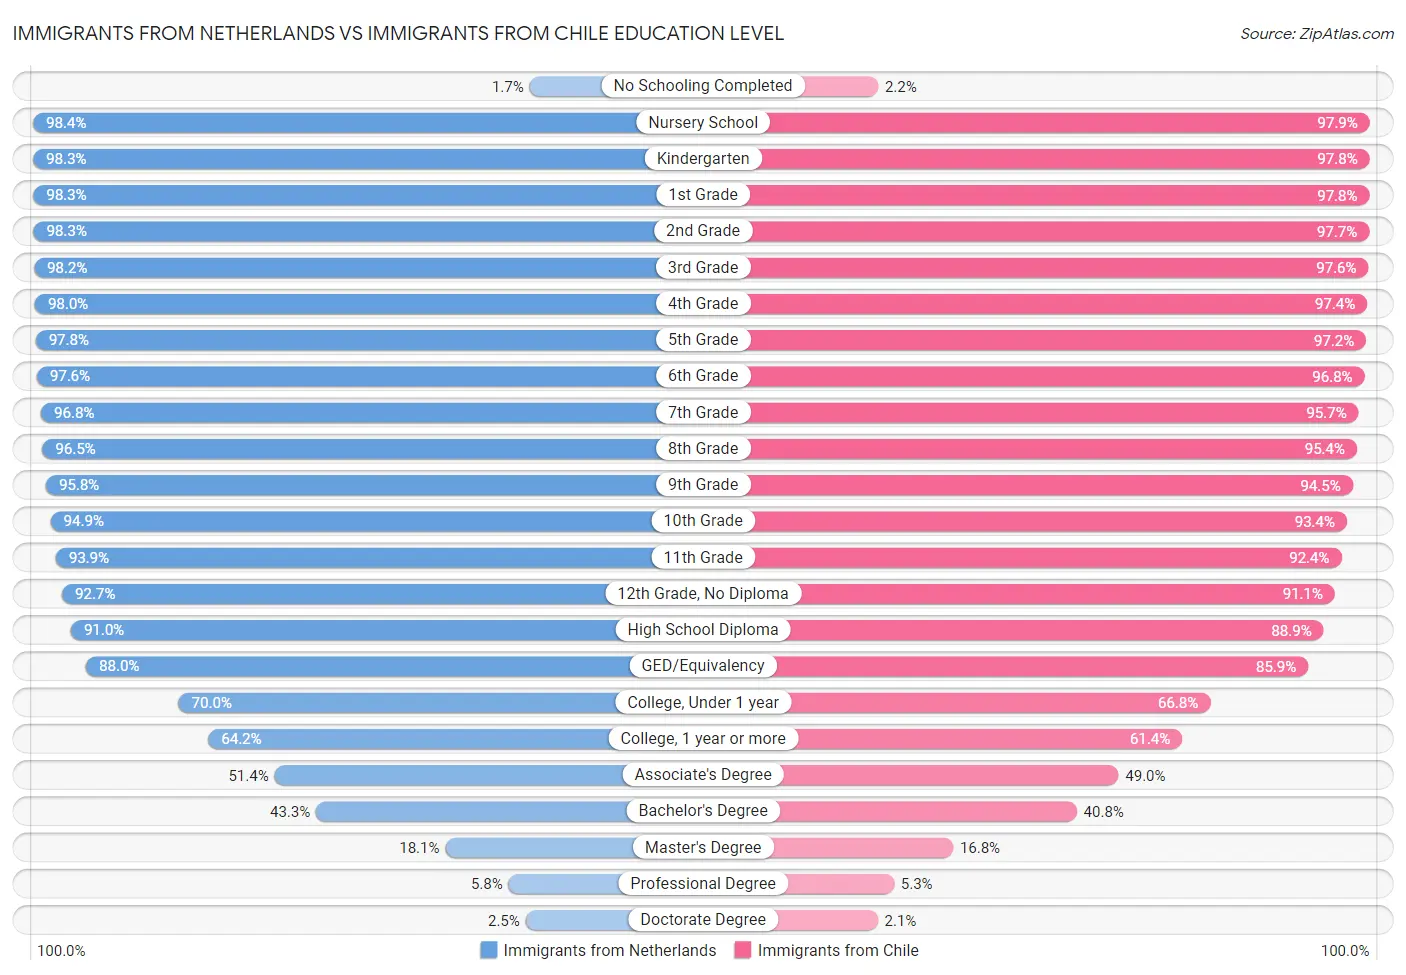 Immigrants from Netherlands vs Immigrants from Chile Education Level